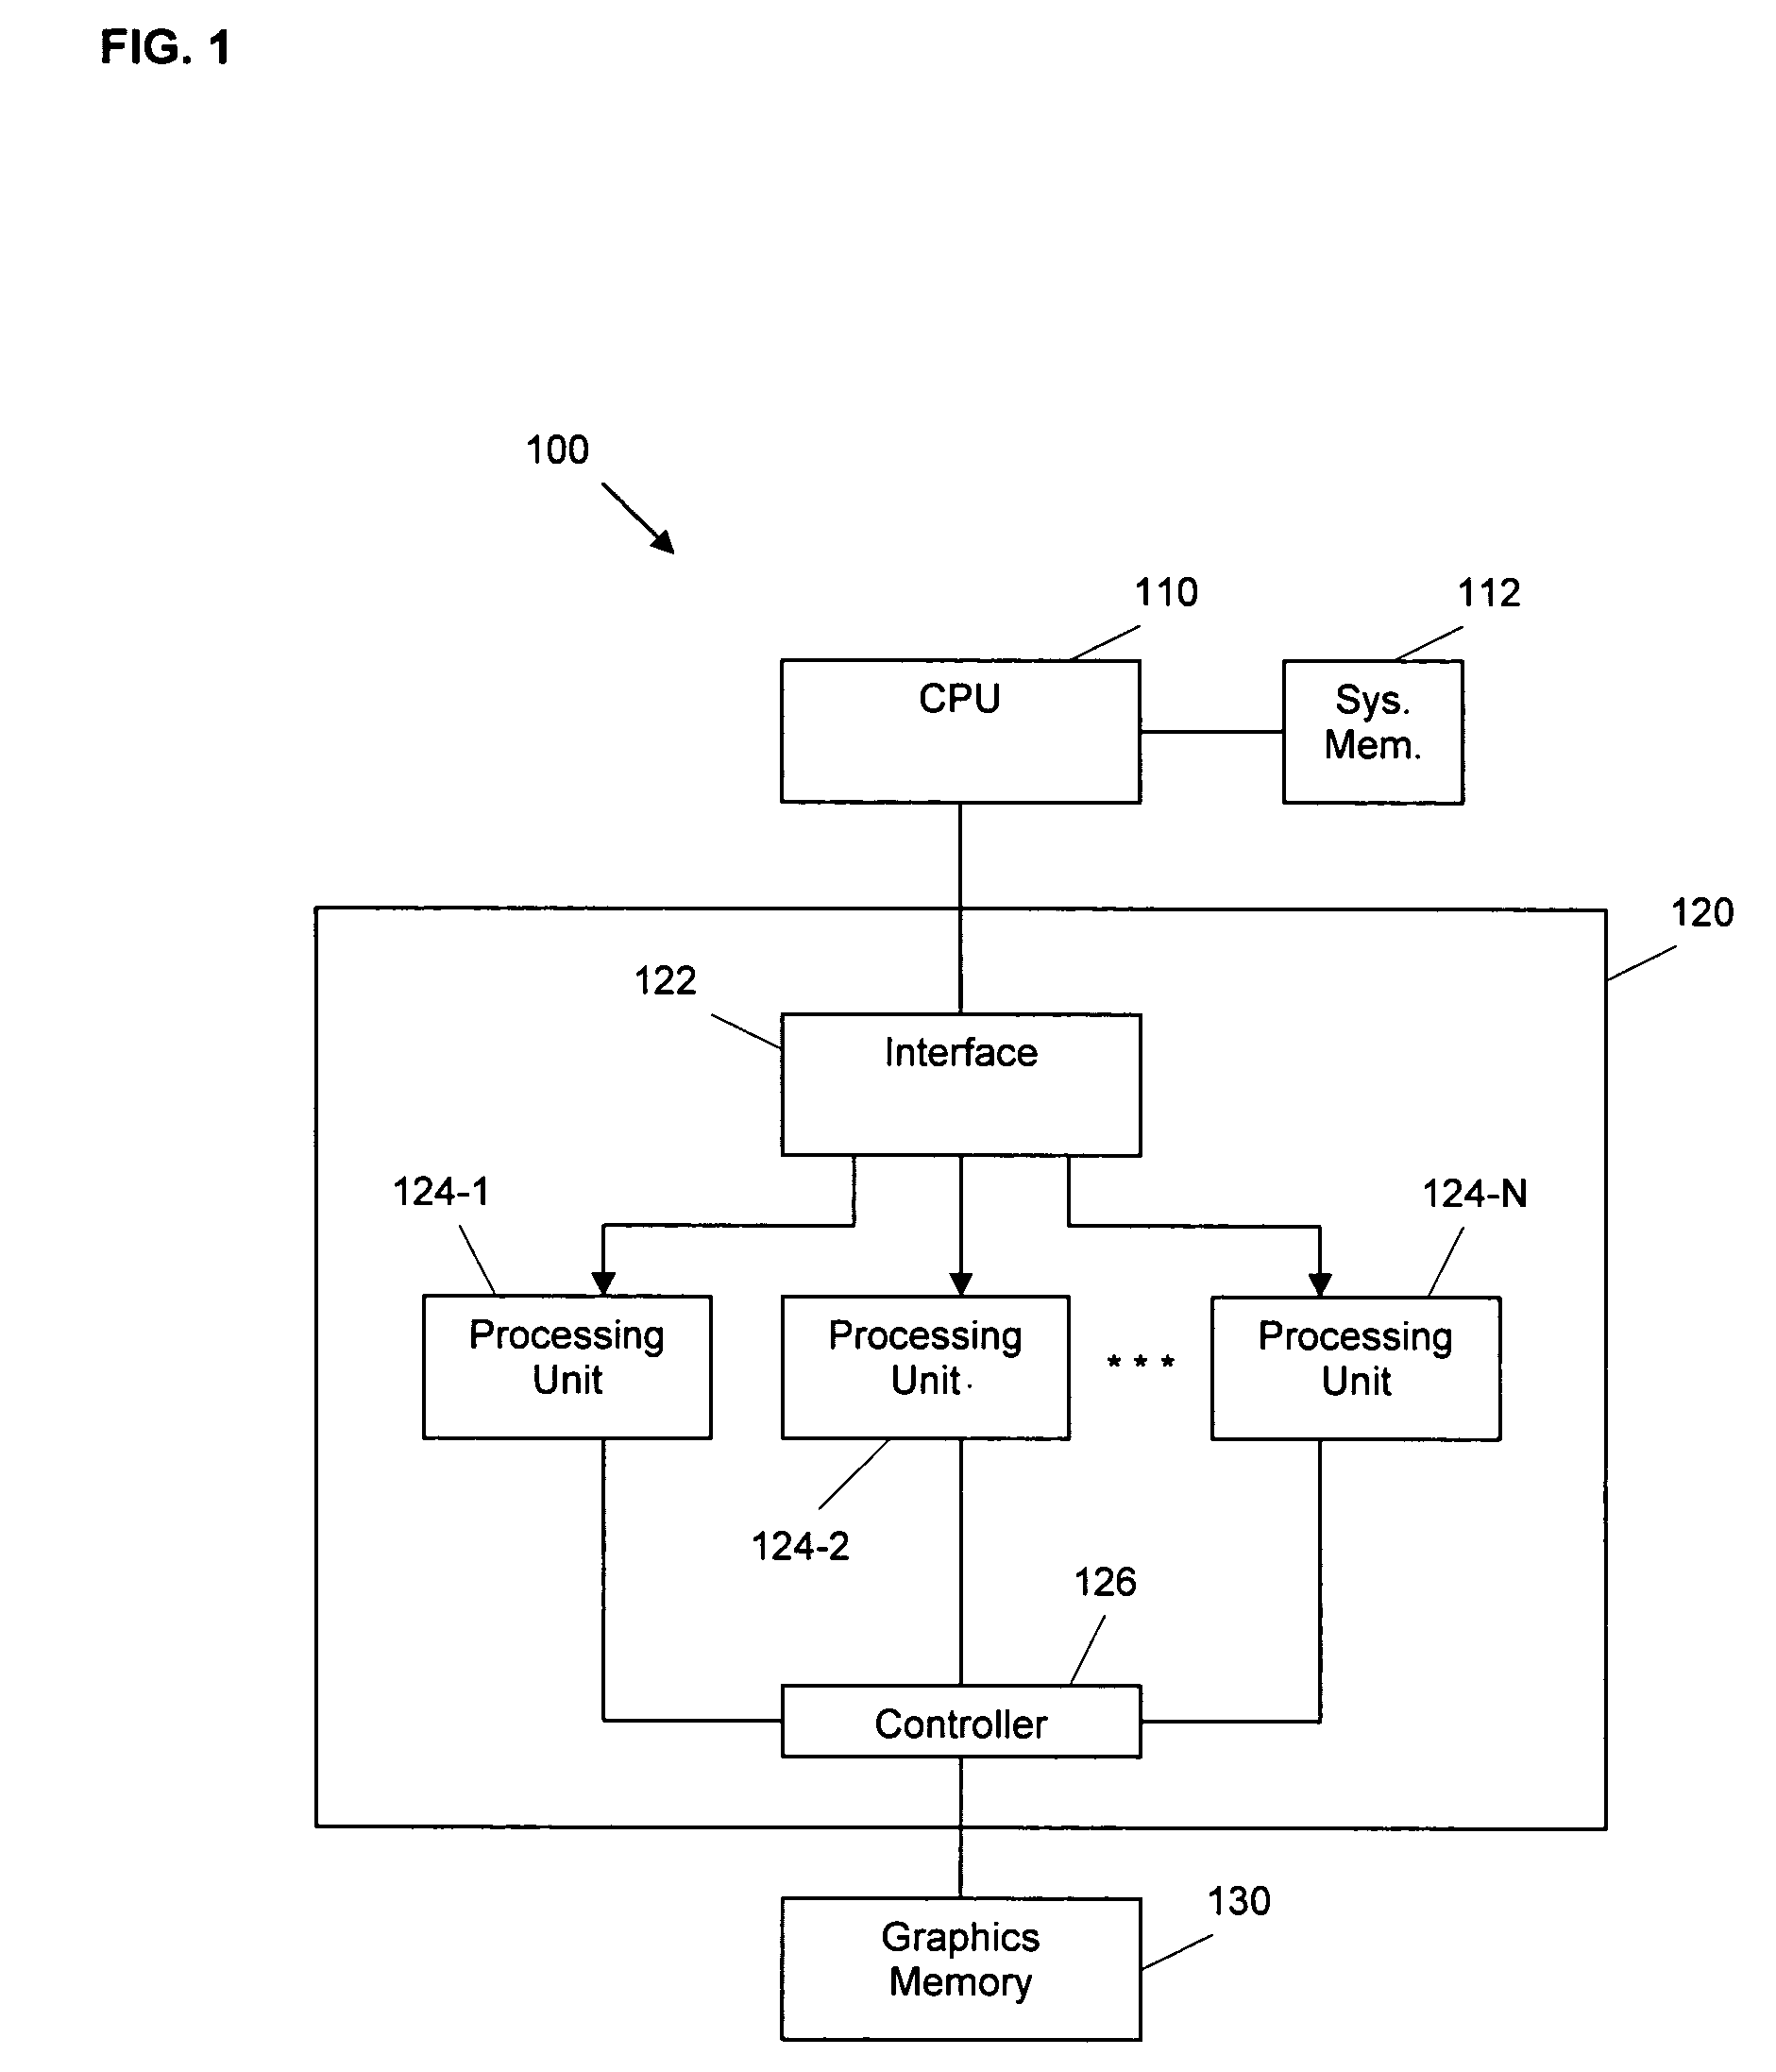 Tracking register usage during multithreaded processing using a scoreboard having separate memory regions and storing sequential register size indicators